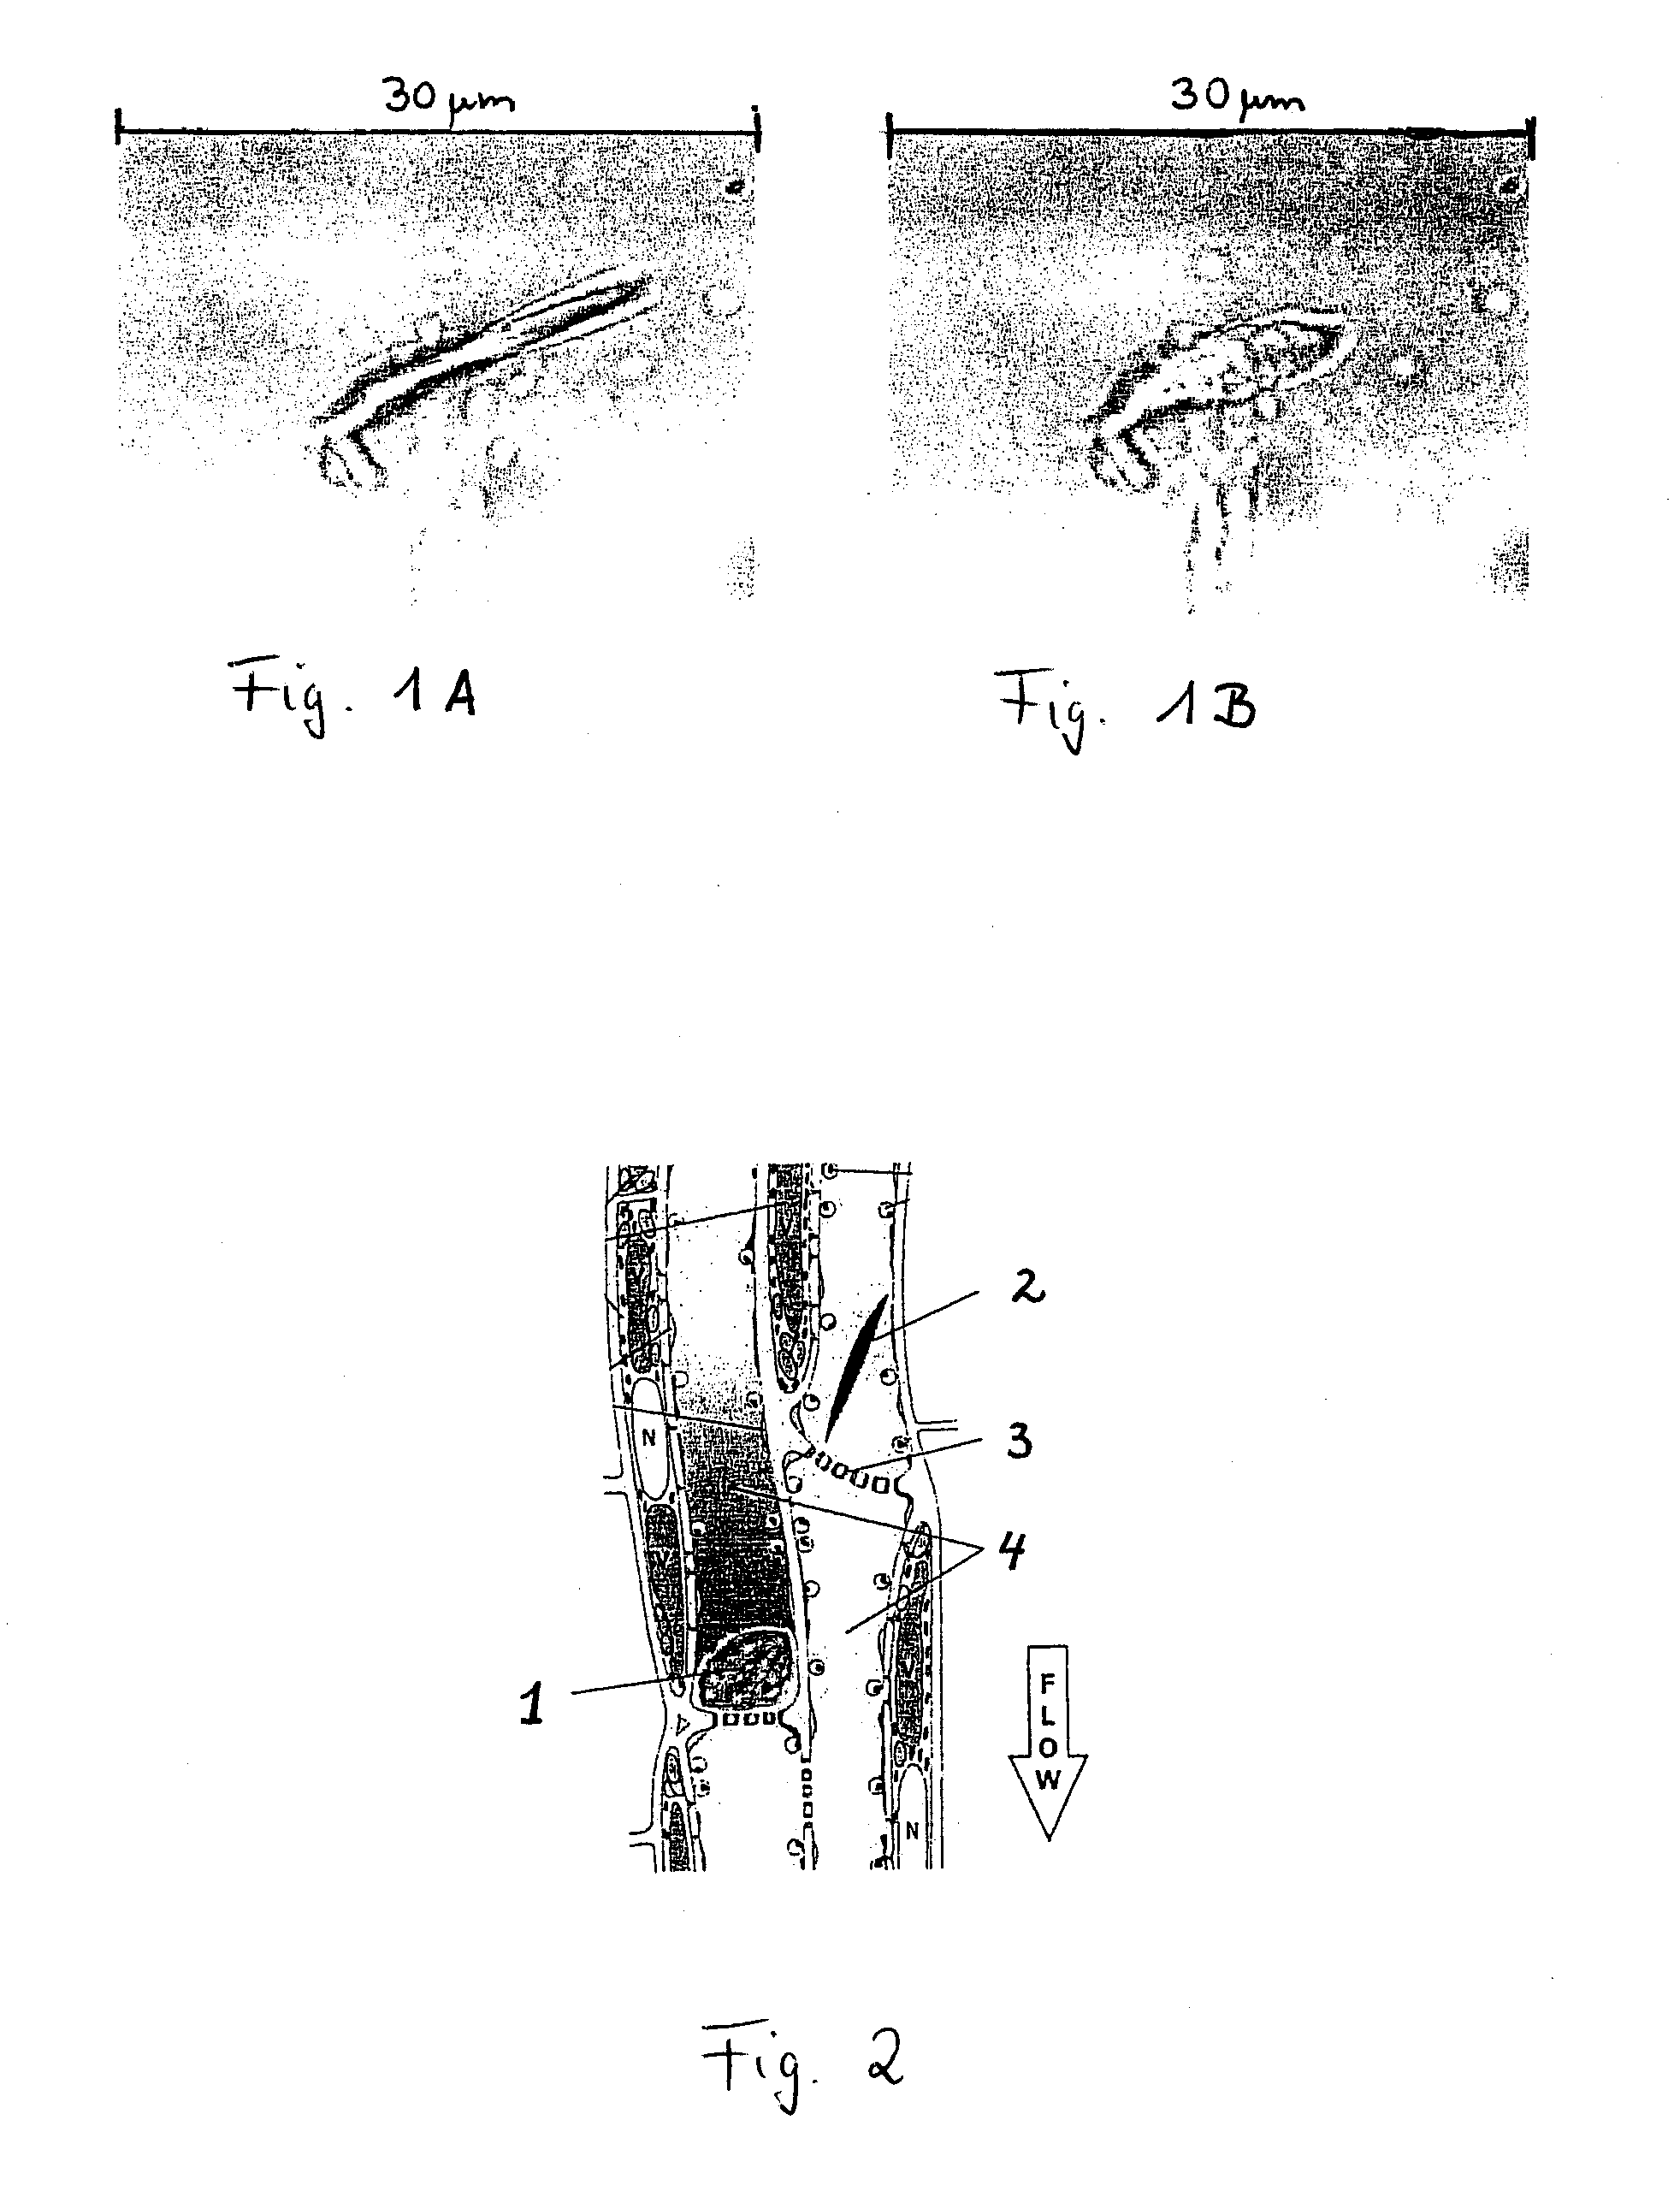 Forisomes, Method for Their Isolation, and Their Use as a Molecular Working Machine